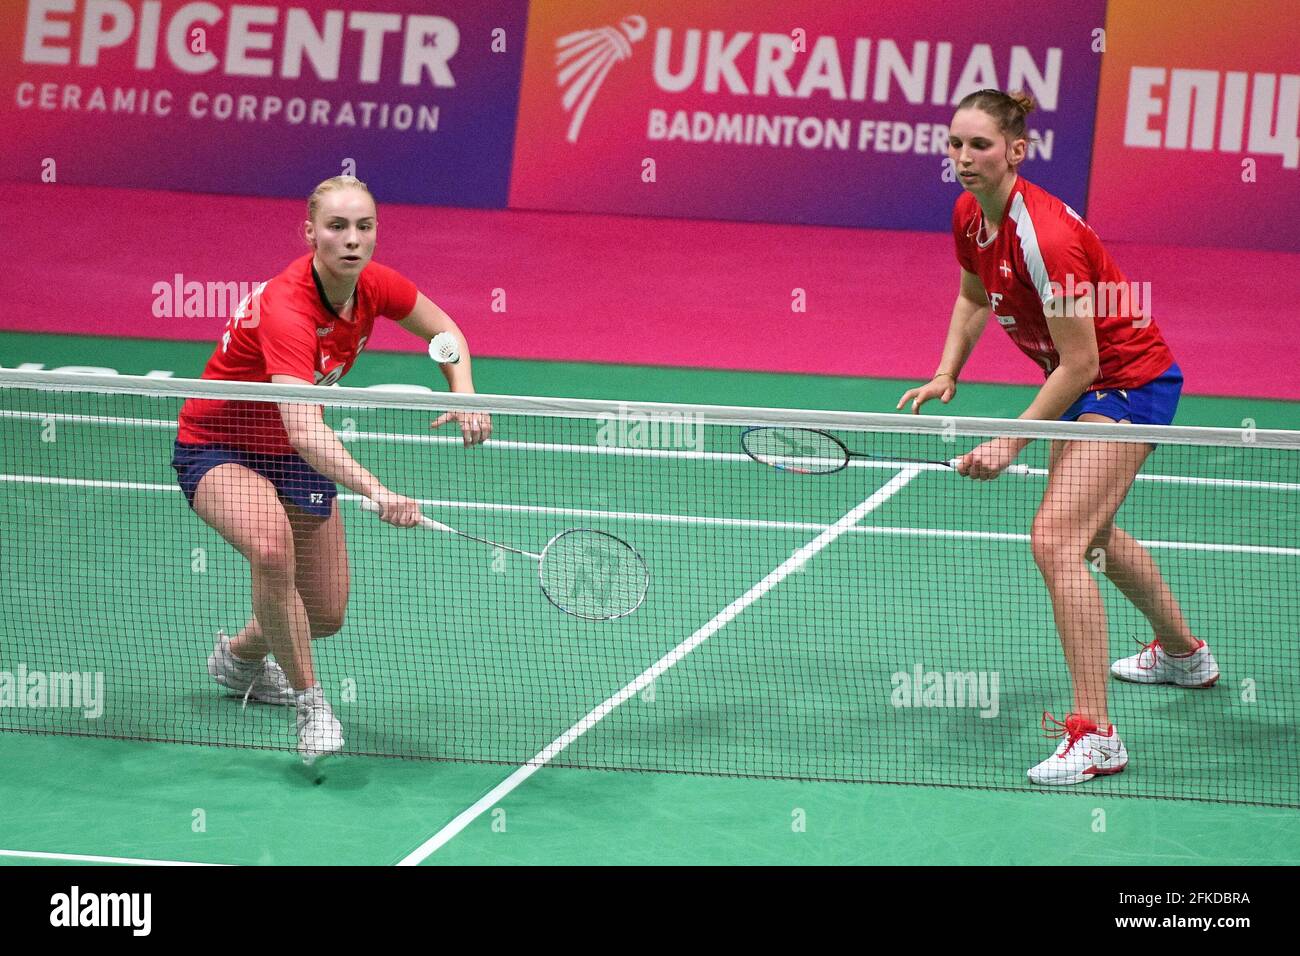 KYIV, UKRAINE - APRIL 30: Alexandra Boje of Denmark competes in her Womens  Doubles match with Mette Poulsen of Denmark against Alexandra Boje of  Denmark and Mette Poulsen of Denmark during Day